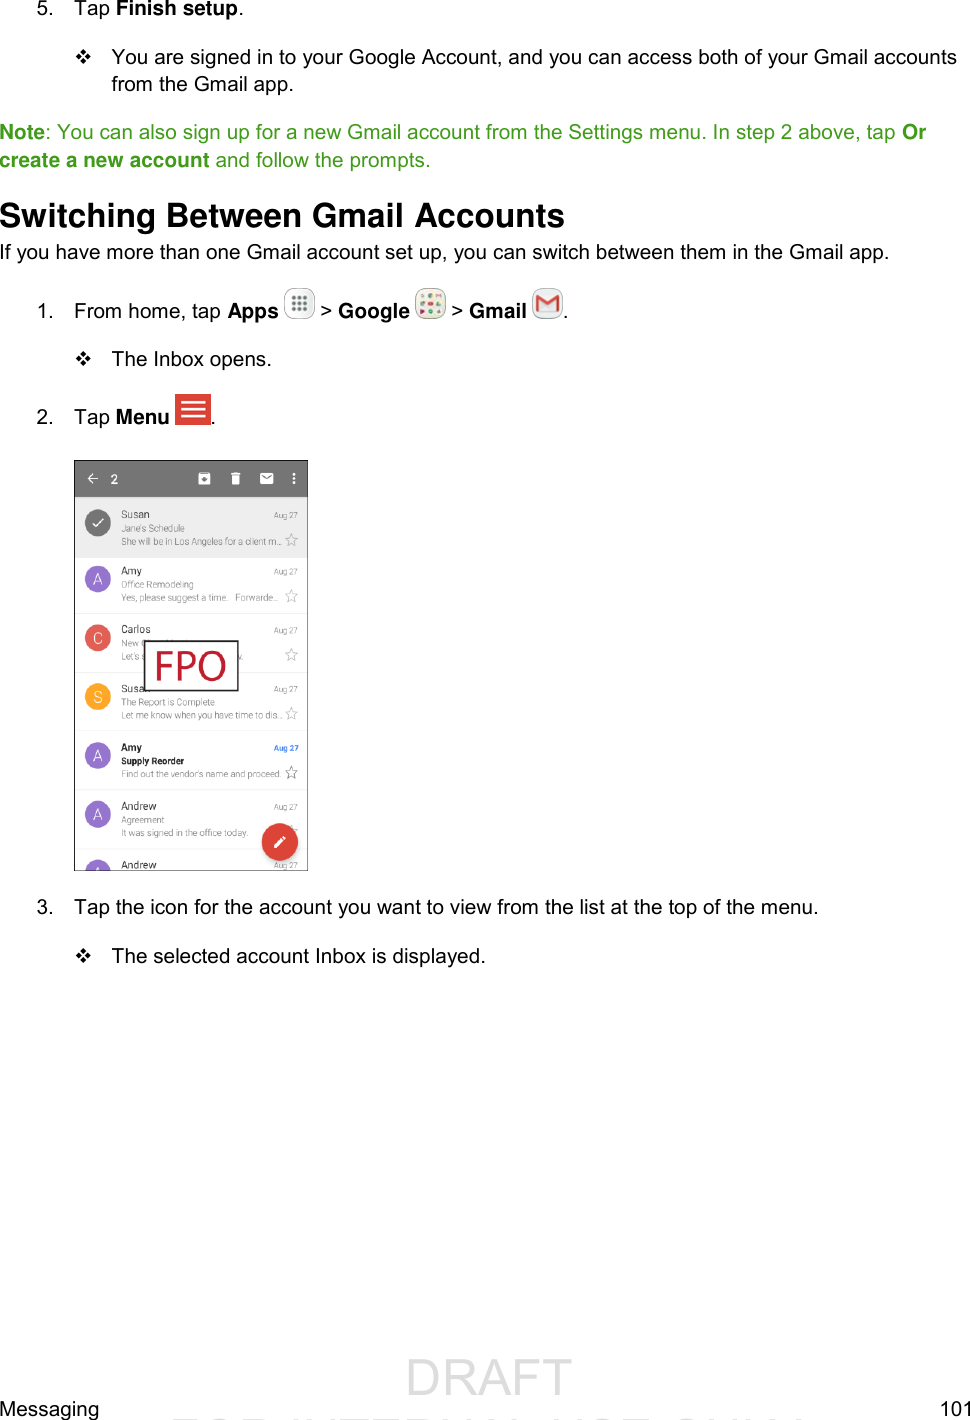                  DRAFT FOR INTERNAL USE ONLYMessaging  101 5.  Tap Finish setup.    You are signed in to your Google Account, and you can access both of your Gmail accounts from the Gmail app. Note: You can also sign up for a new Gmail account from the Settings menu. In step 2 above, tap Or create a new account and follow the prompts. Switching Between Gmail Accounts If you have more than one Gmail account set up, you can switch between them in the Gmail app. 1.  From home, tap Apps   &gt; Google   &gt; Gmail  .   The Inbox opens. 2.  Tap Menu  .    3.  Tap the icon for the account you want to view from the list at the top of the menu.   The selected account Inbox is displayed. 